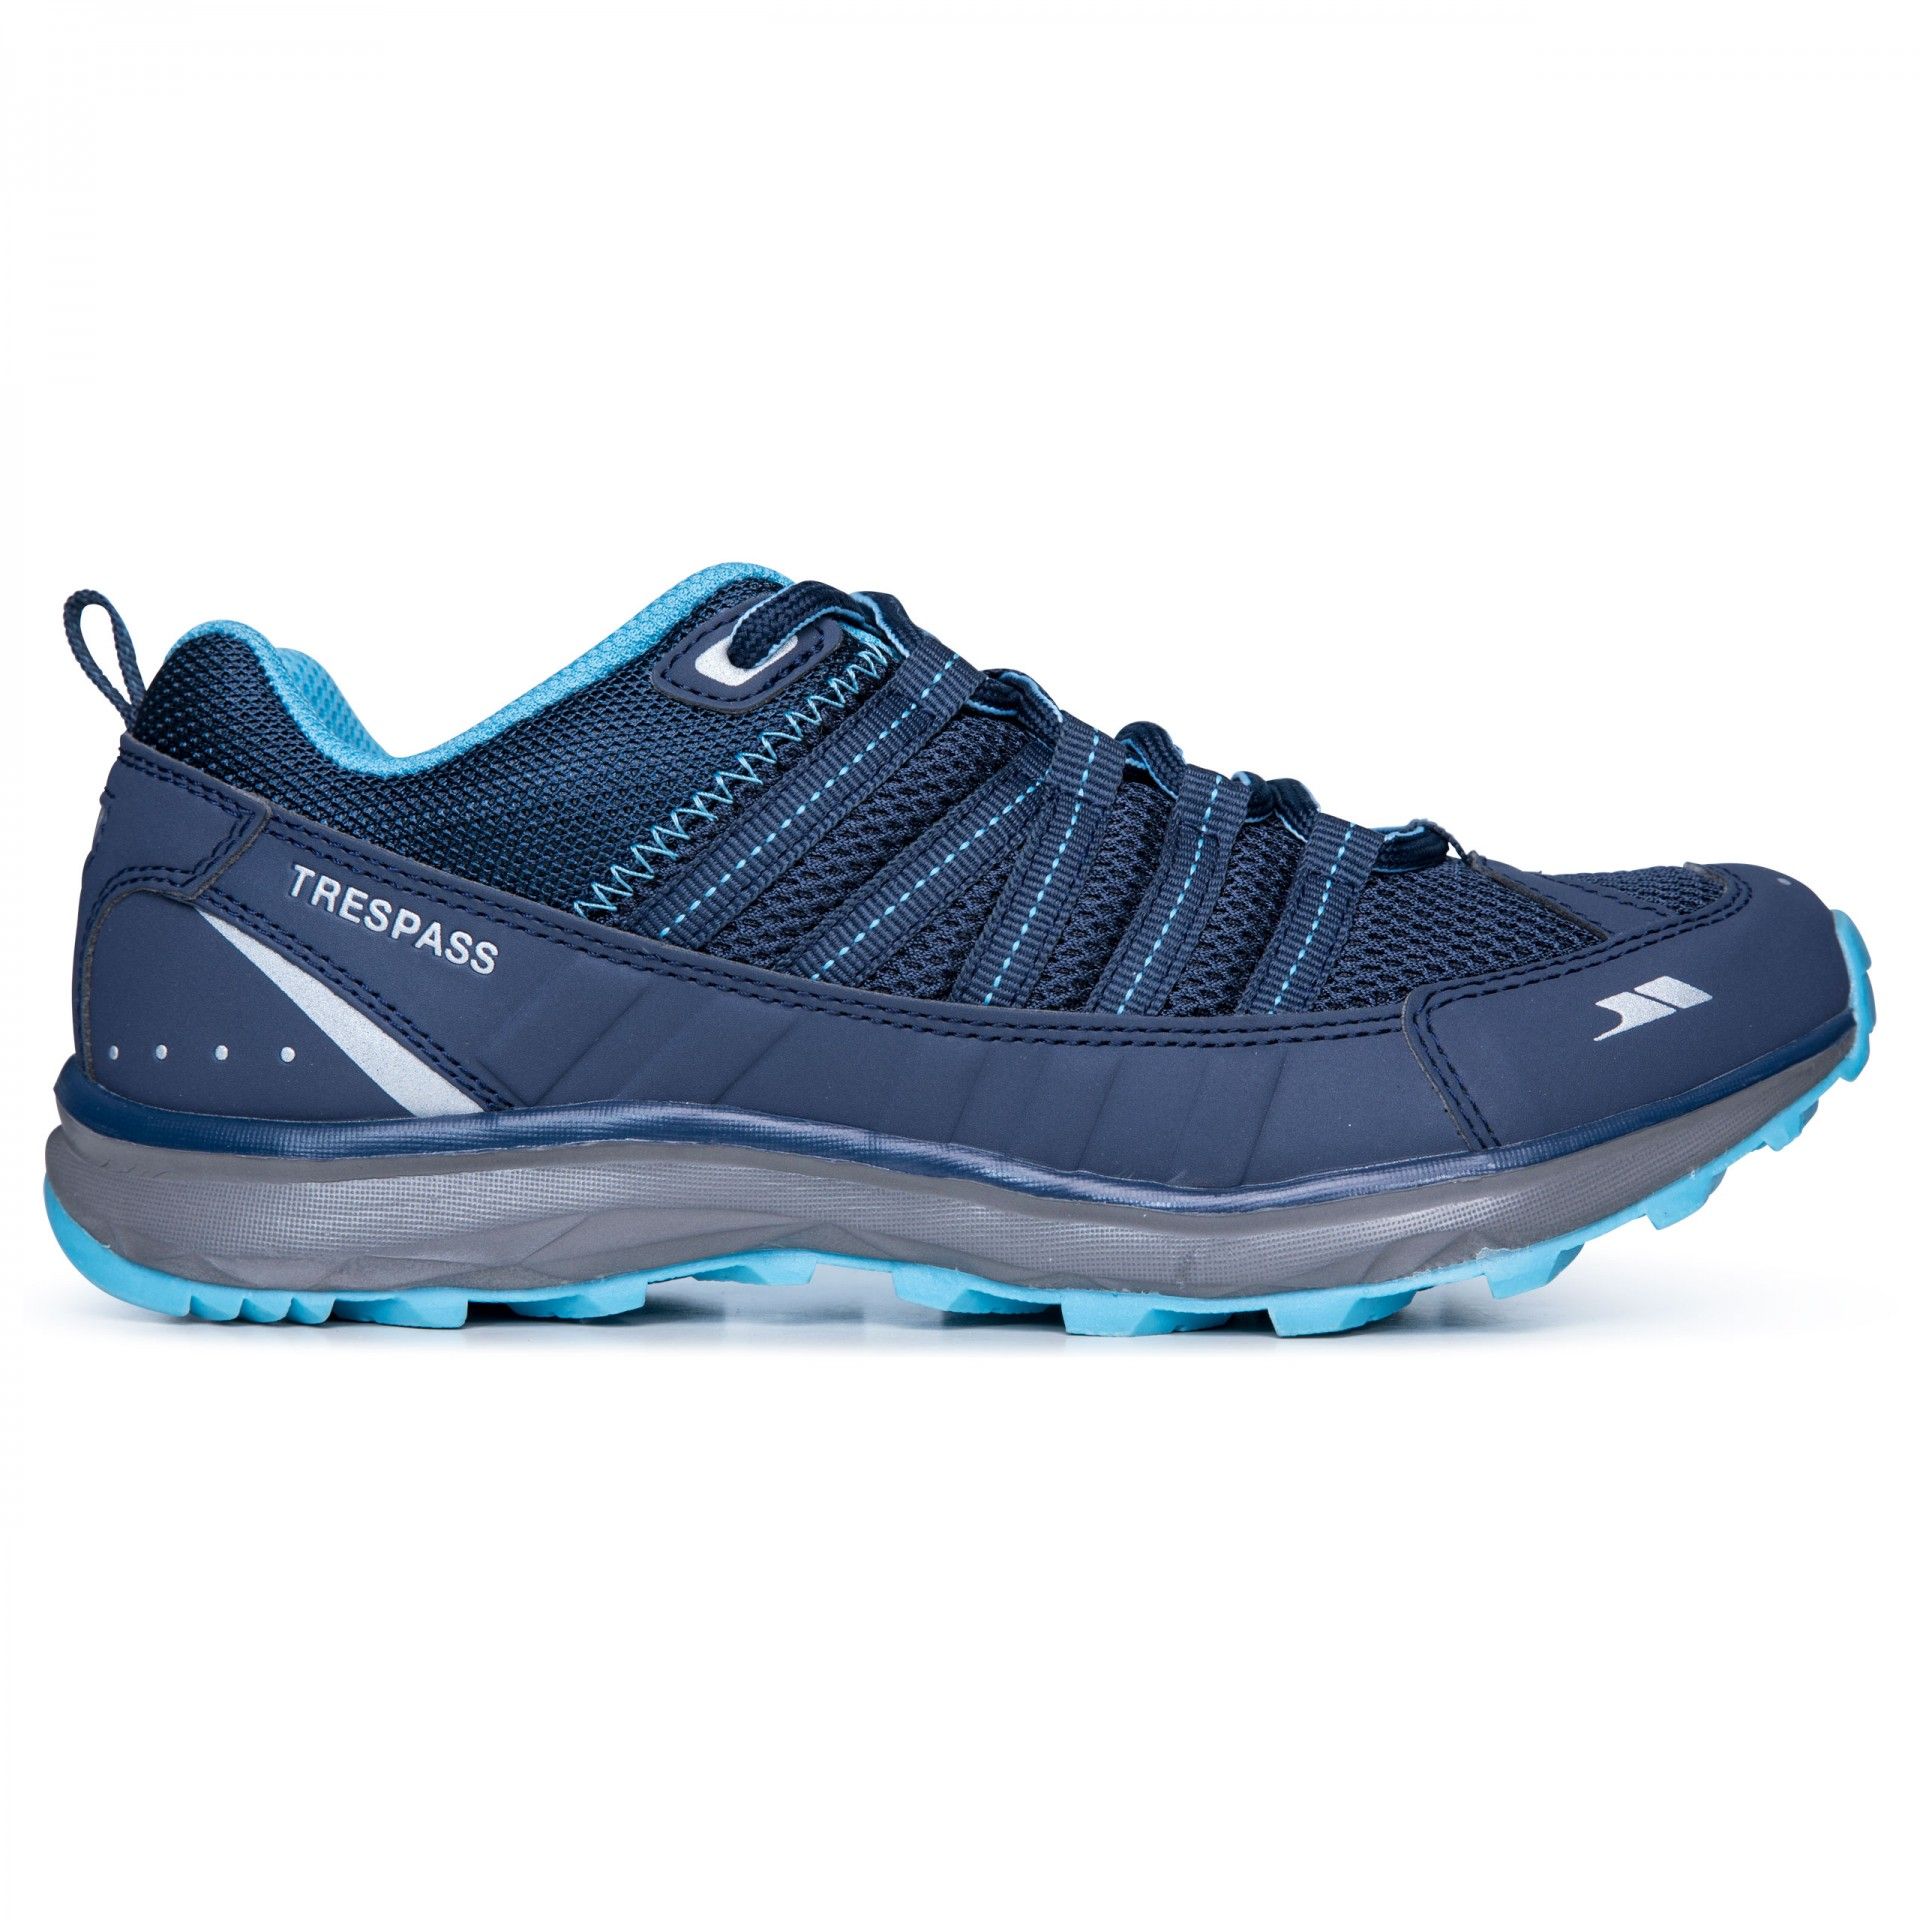 Womens low trainer. Lightweight and breathable. Reflective detailing. Cushioned and moulded footbed. Durable traction outsole. Upper: PU/Mesh, Lining: Mesh, Insole: Moulded EVA, Outsole: Injected EVA/Rubber.